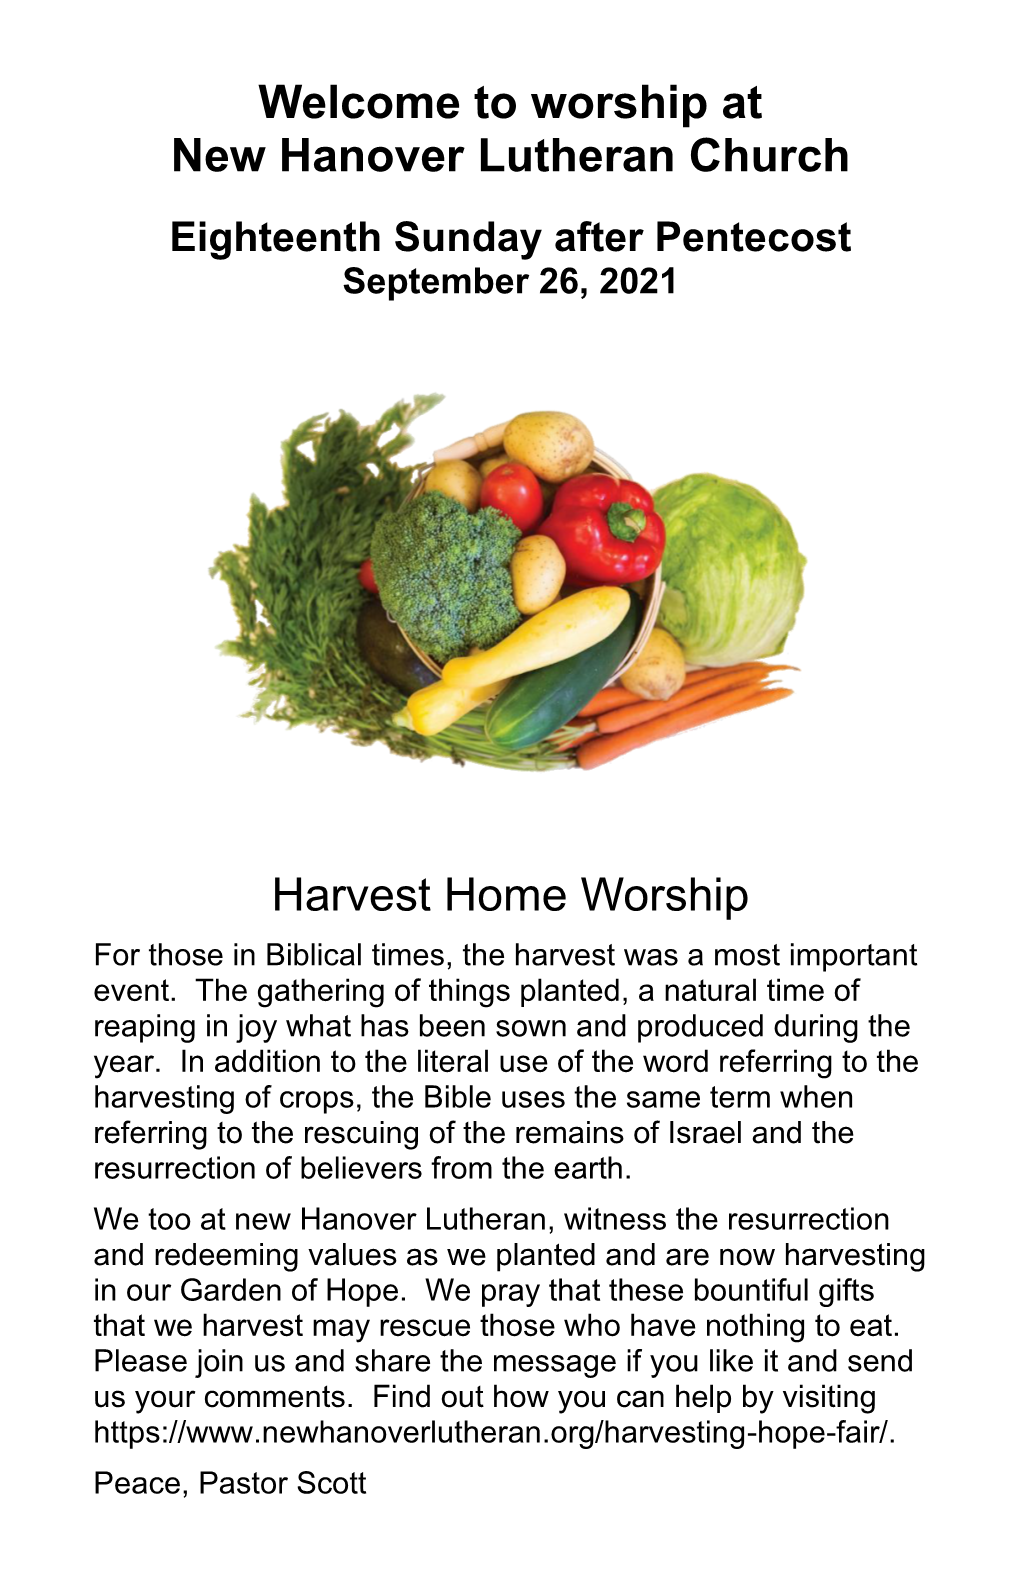 Welcome to Worship at New Hanover Lutheran Church Eighteenth Sunday After Pentecost September 26, 2021